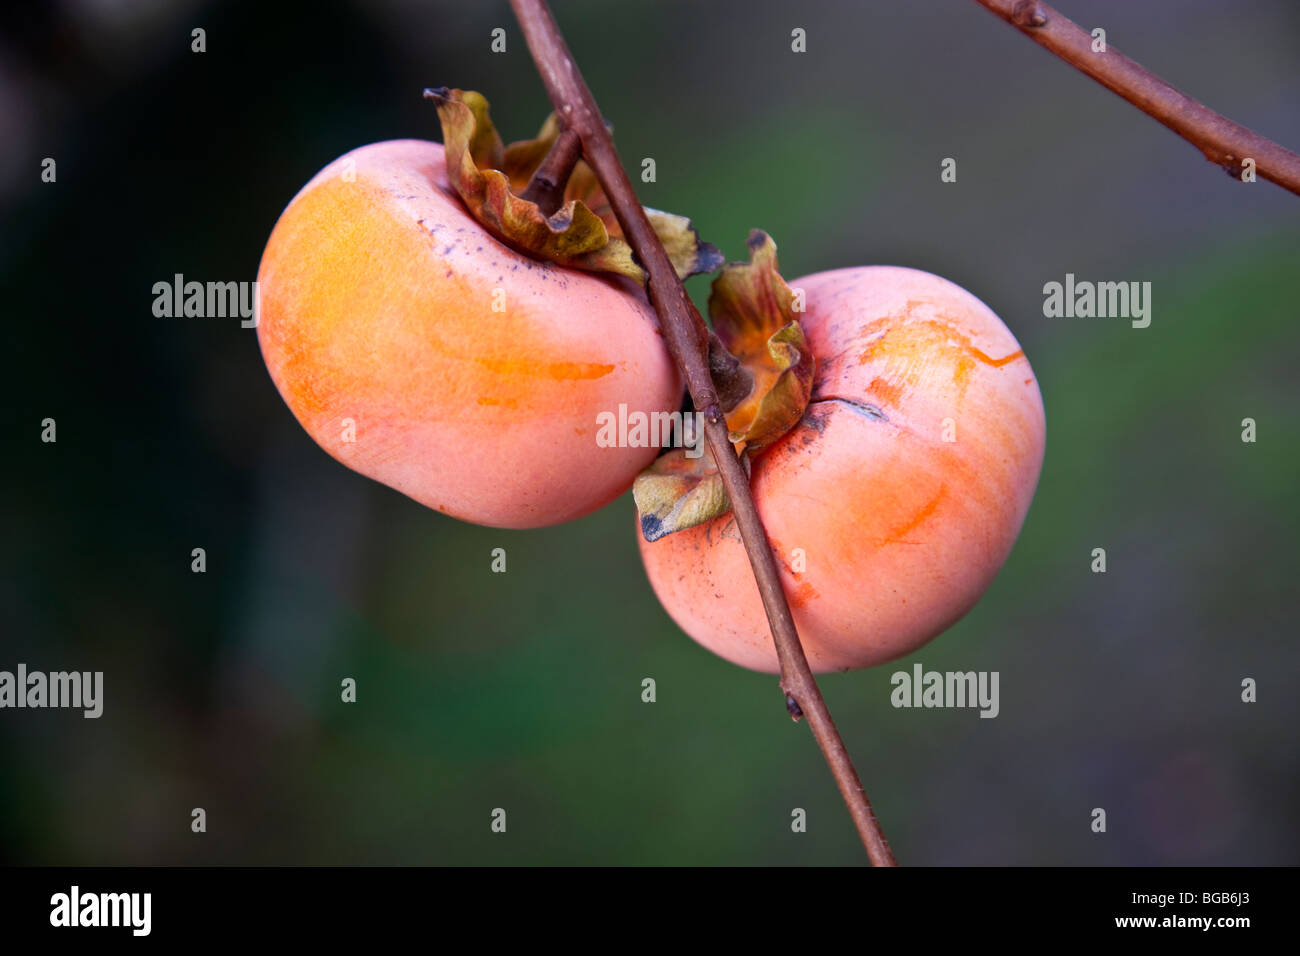 Persimmons 'Fuyu' on branch. Stock Photo